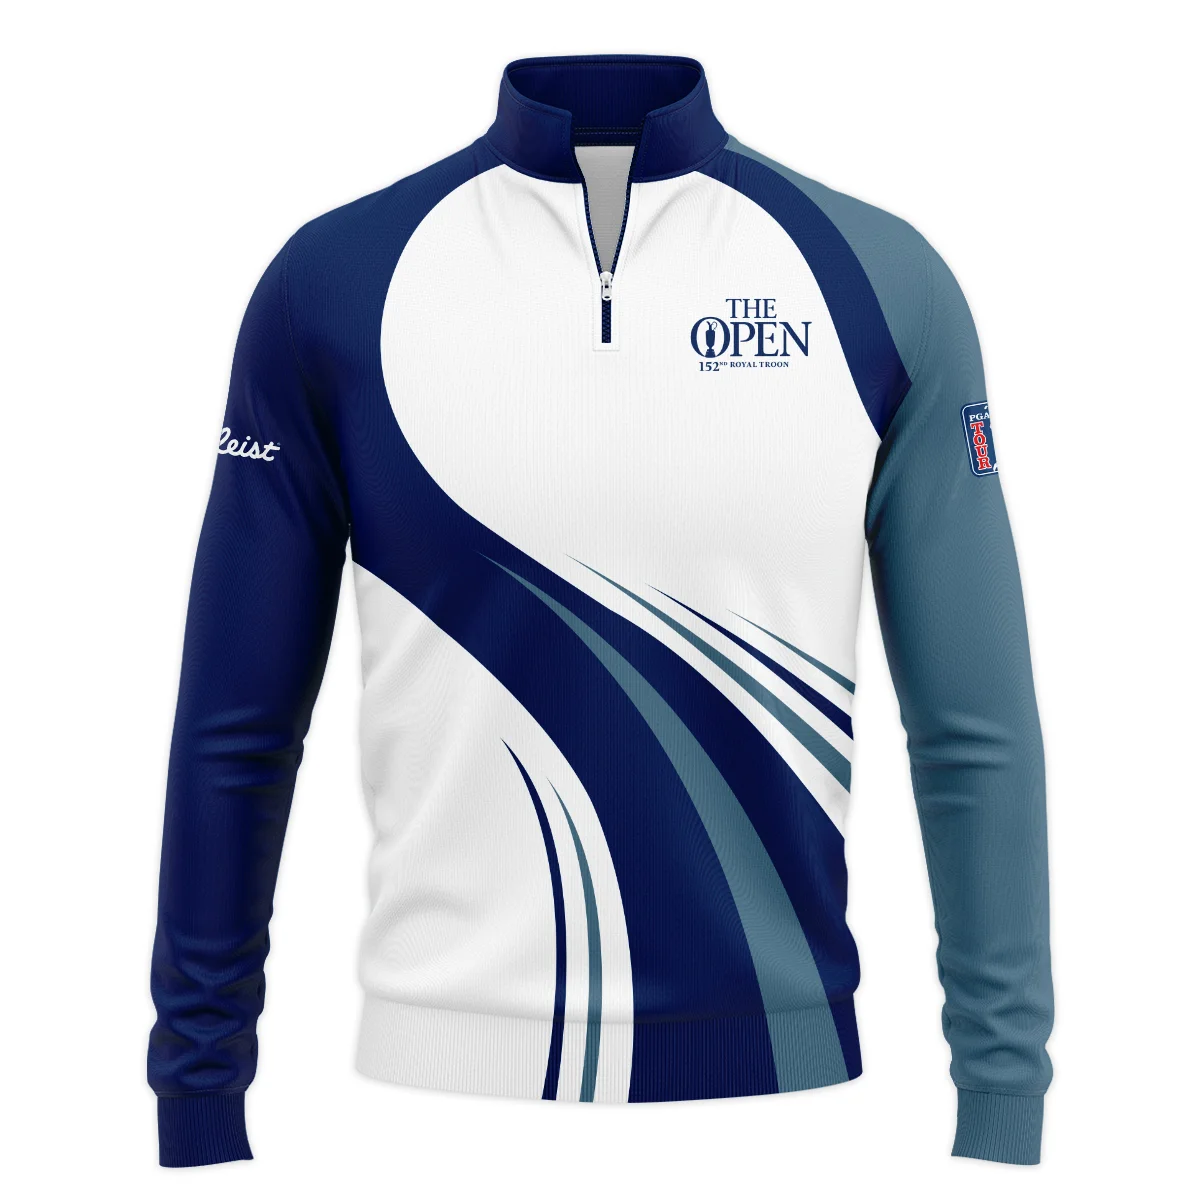 152nd Open Championship Titleist White Mostly Desaturated Dark Blue Performance Quarter Zip Sweatshirt With Pockets All Over Prints HOTOP270624A02TLTS